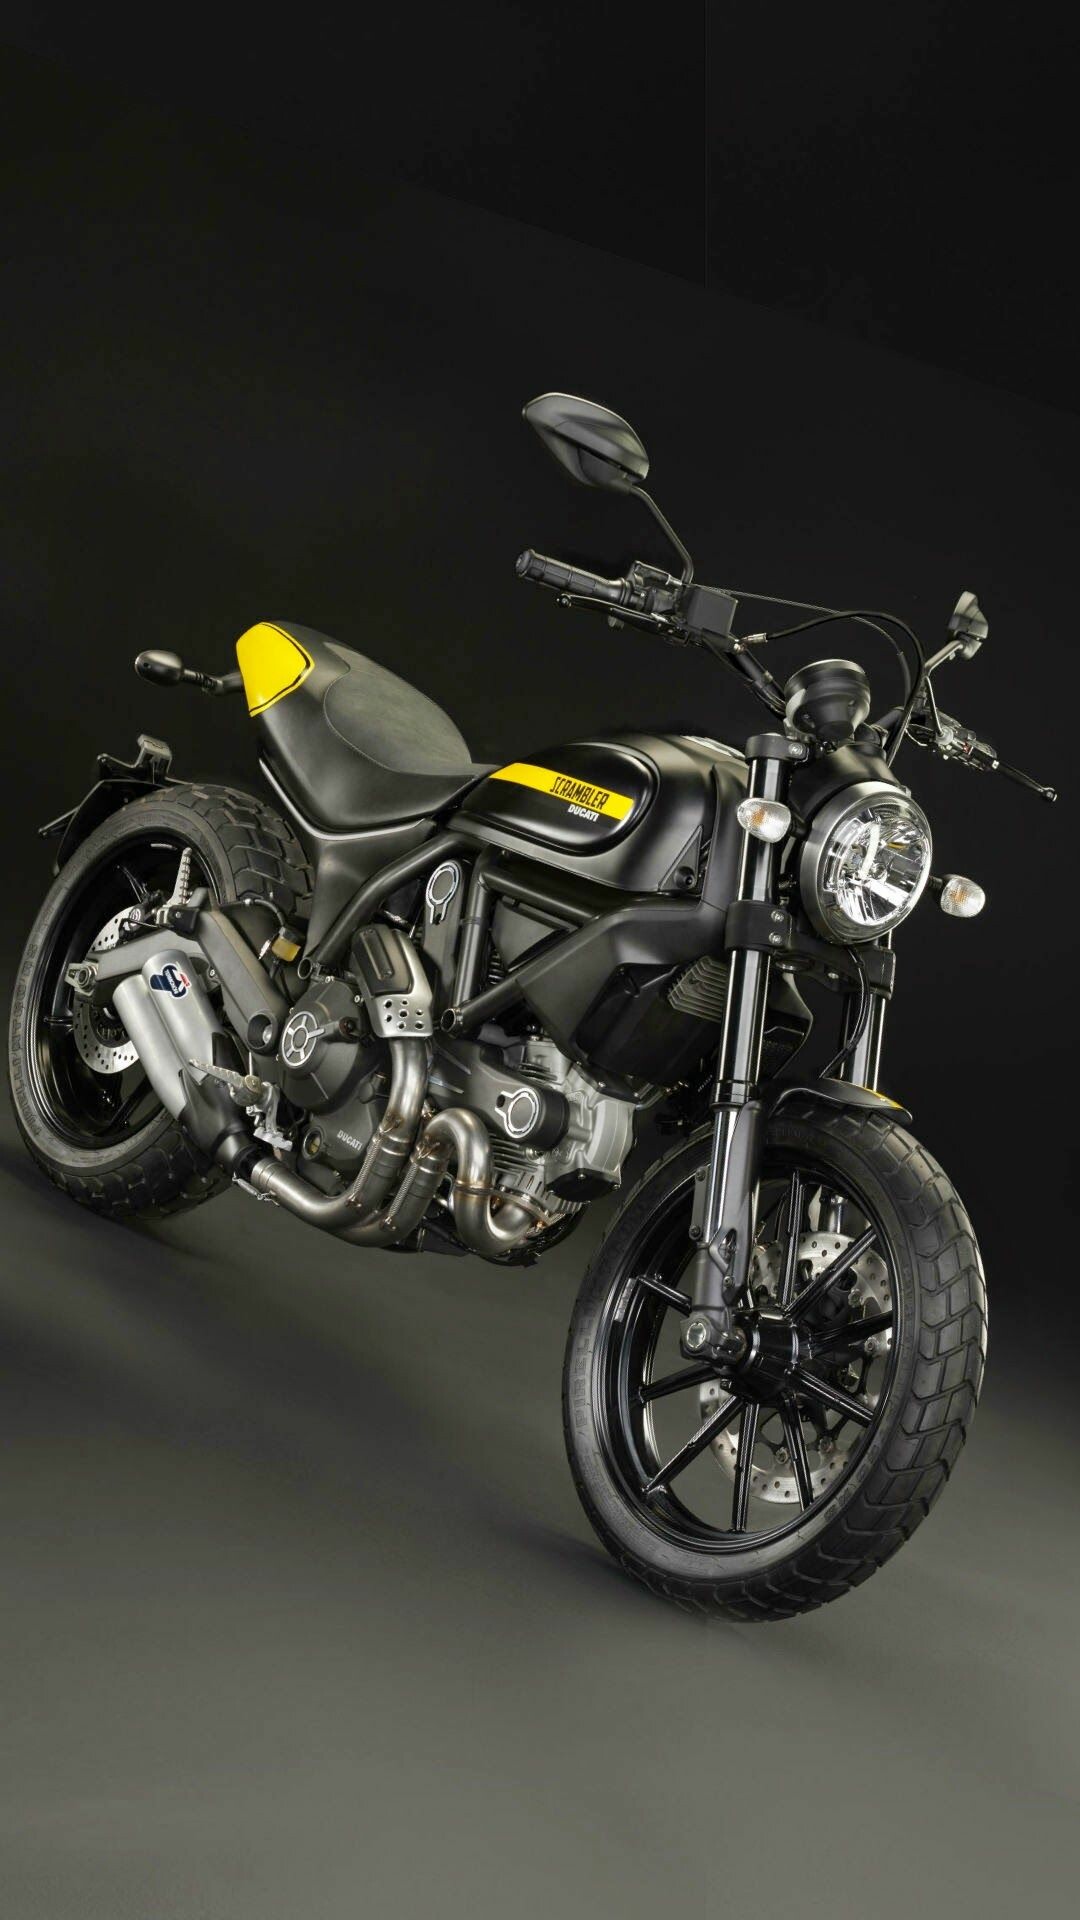 Ducati: The Scrambler, was introduced at the 2014, A V-twin engined roadster motorcycle. 1080x1920 Full HD Wallpaper.